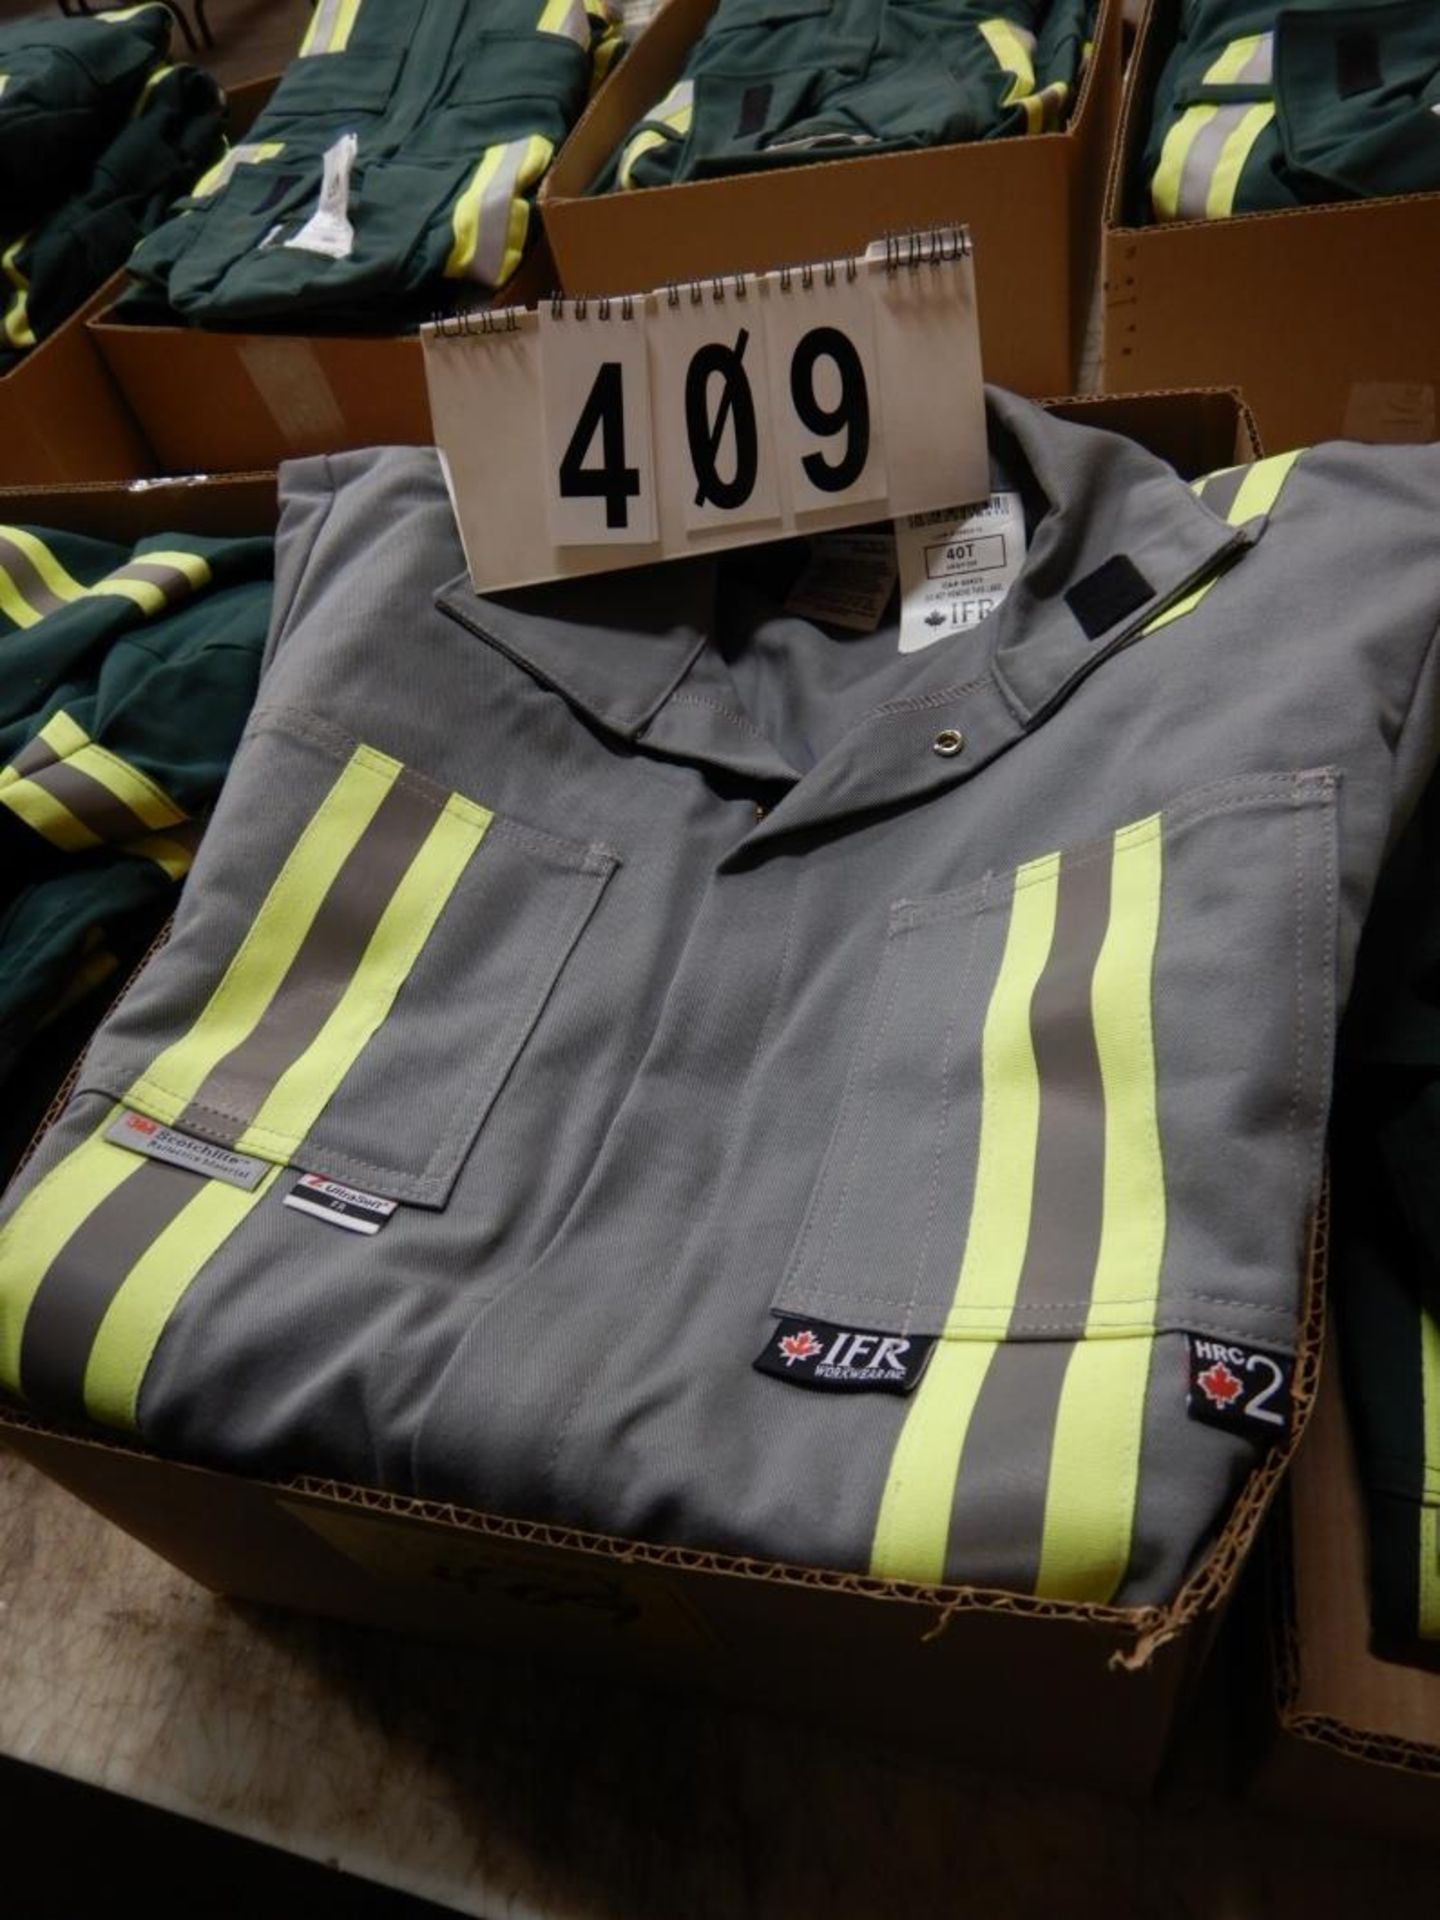 3-PR IFR GREY, NAVY & GREEN SAFETY COVERALS, SIZE 40 & 40T